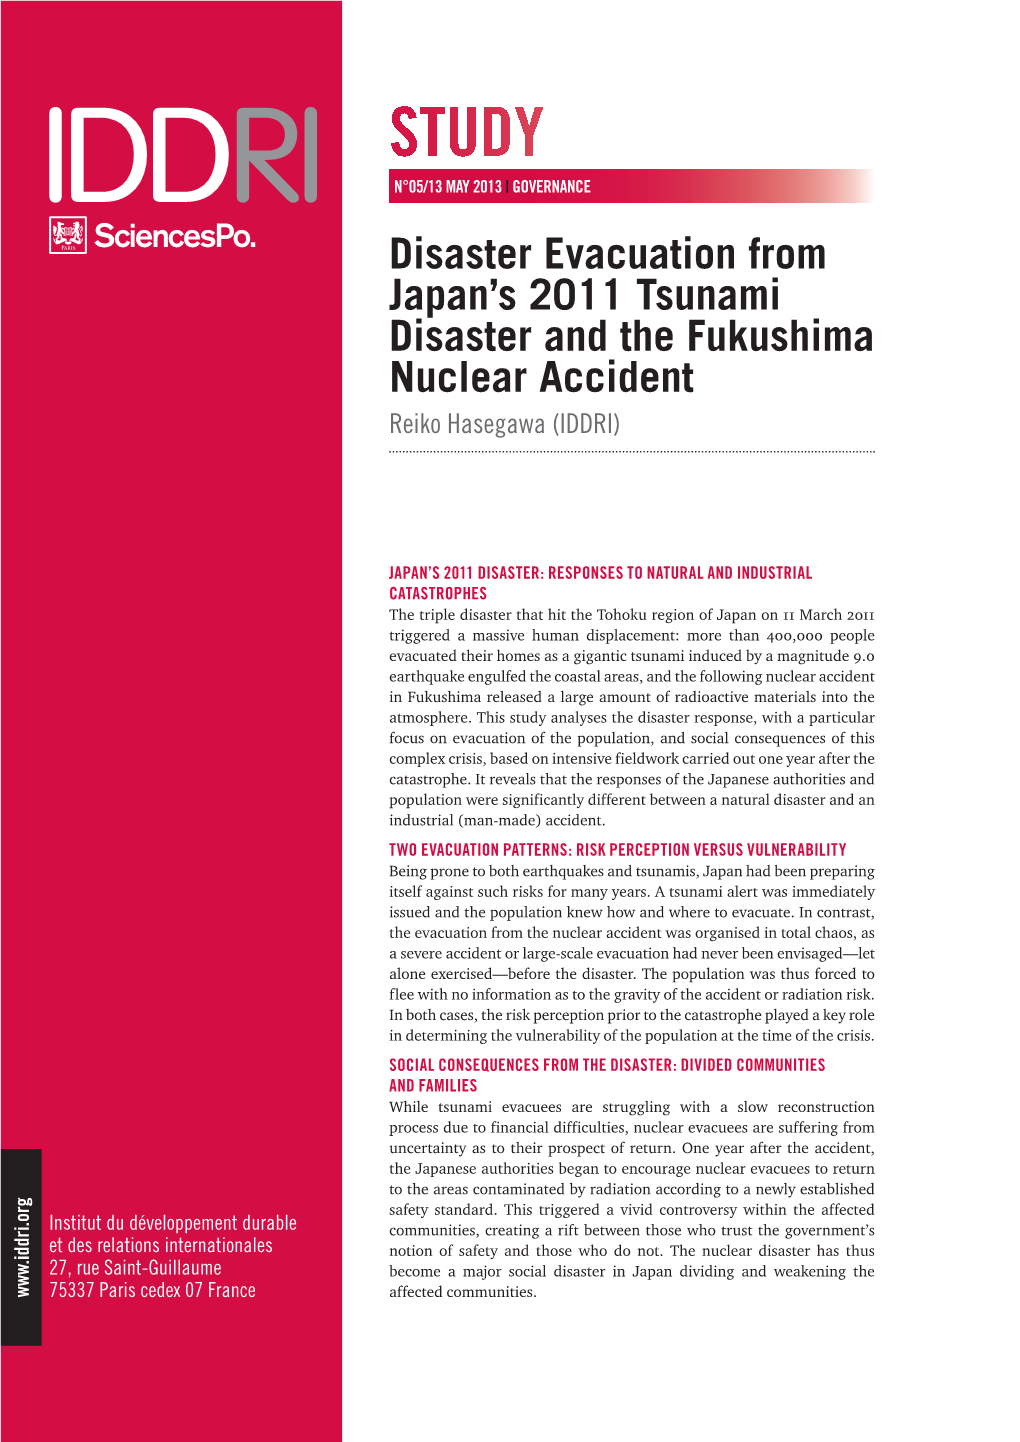 Disaster Evacuation from Japan's 2011 Tsunami Disaster and The